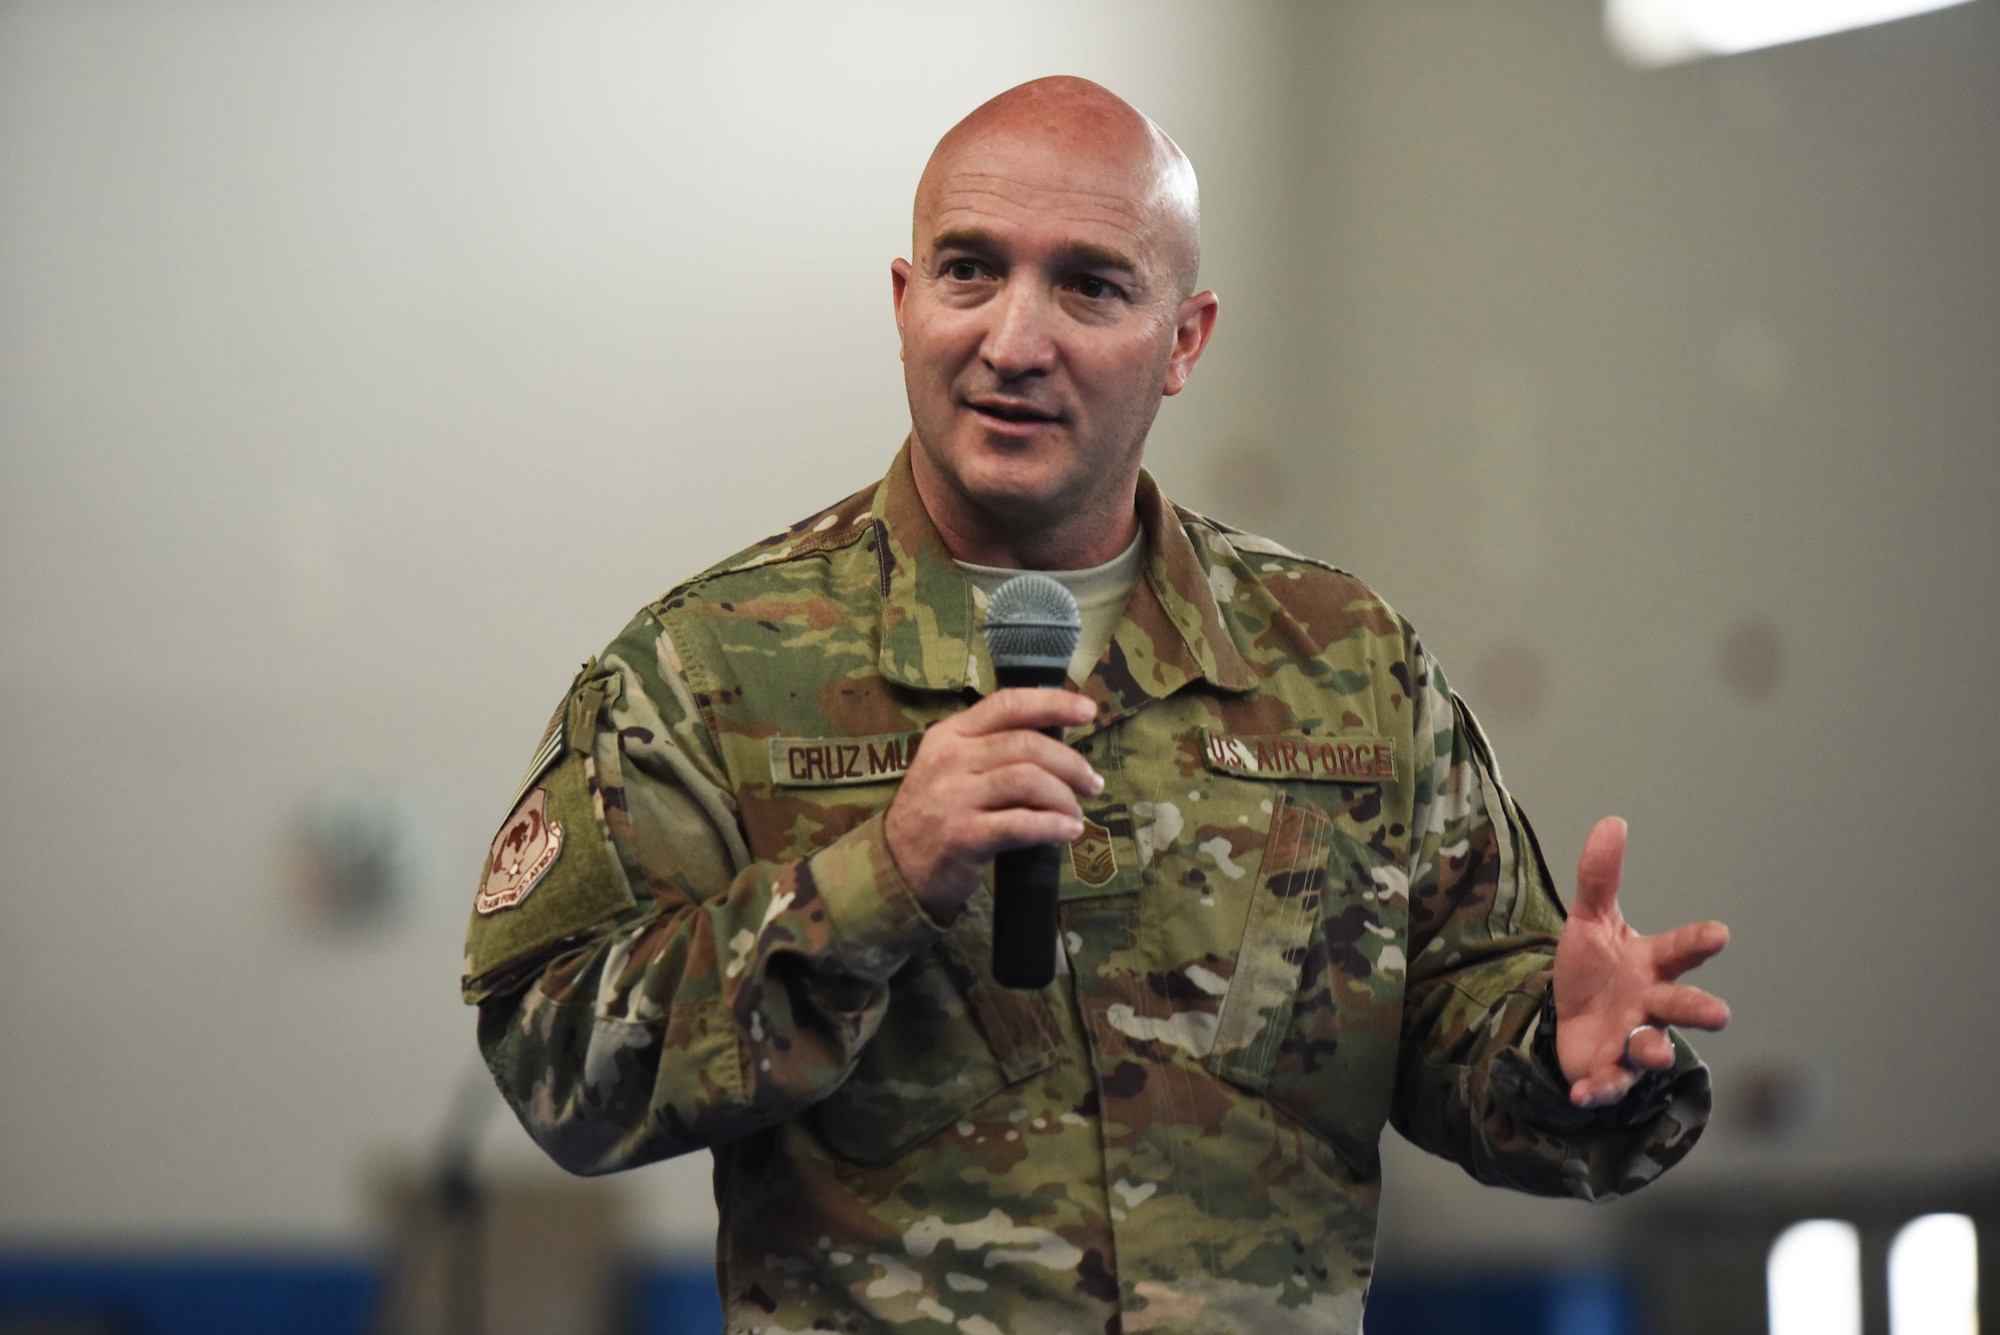 3rd AF Command Chief speaks at an all-call at Camp Lemonnier